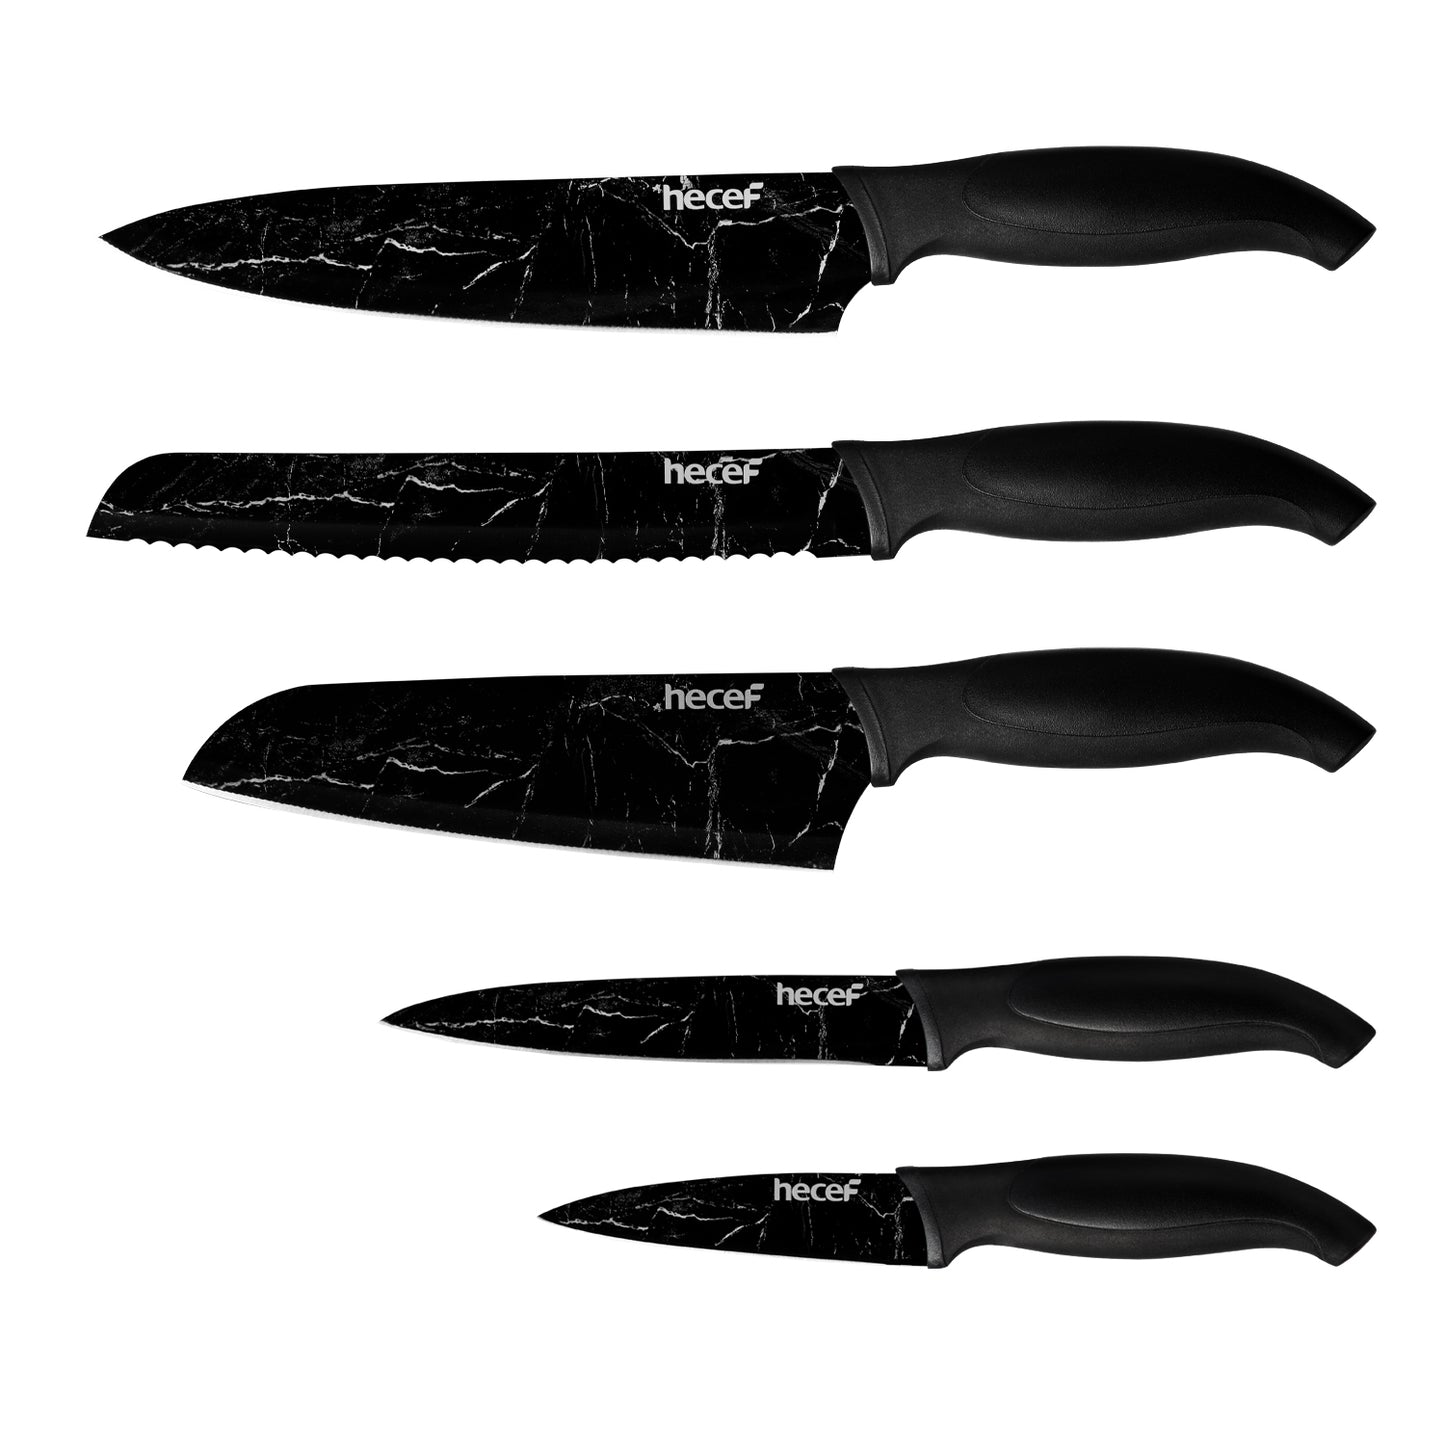 hecef Marble Pattern Kitchen Knife Set of 5, Premium Stainless Steel Blade with Ergonomic Handle（PP+TPR Material）includes Santoku, Chef, Bread, Utility and Paring Knife - Hecef Kitchen